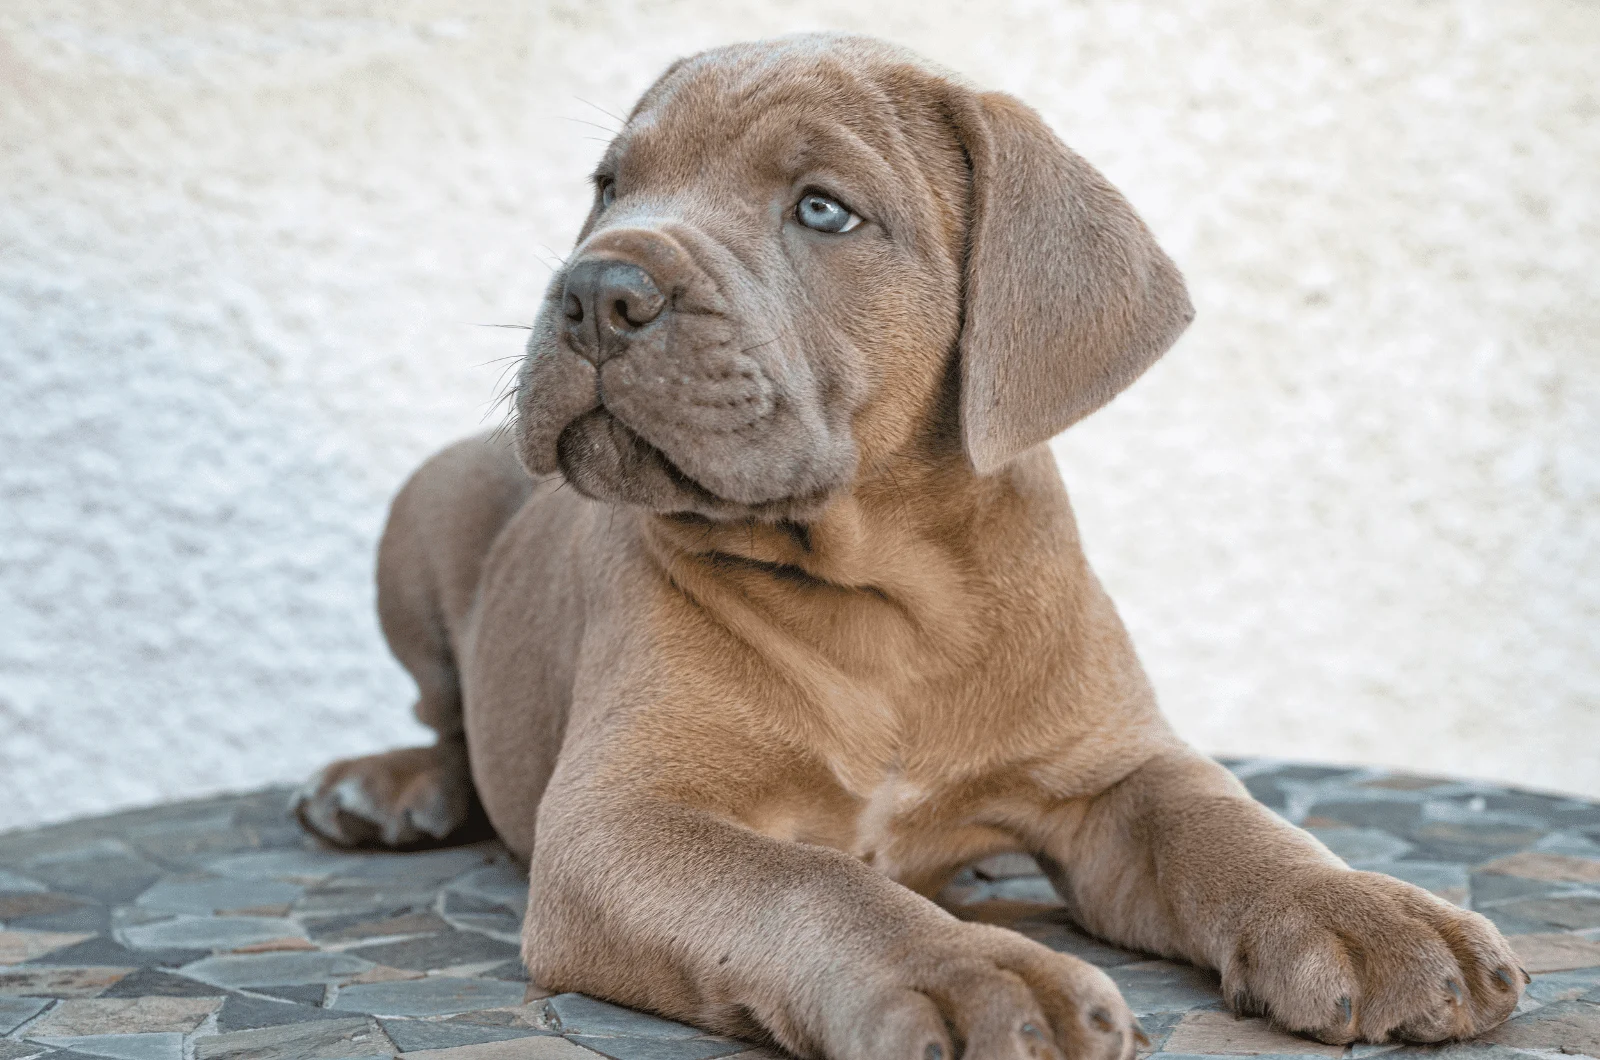 cane corso puppy with blue eyes